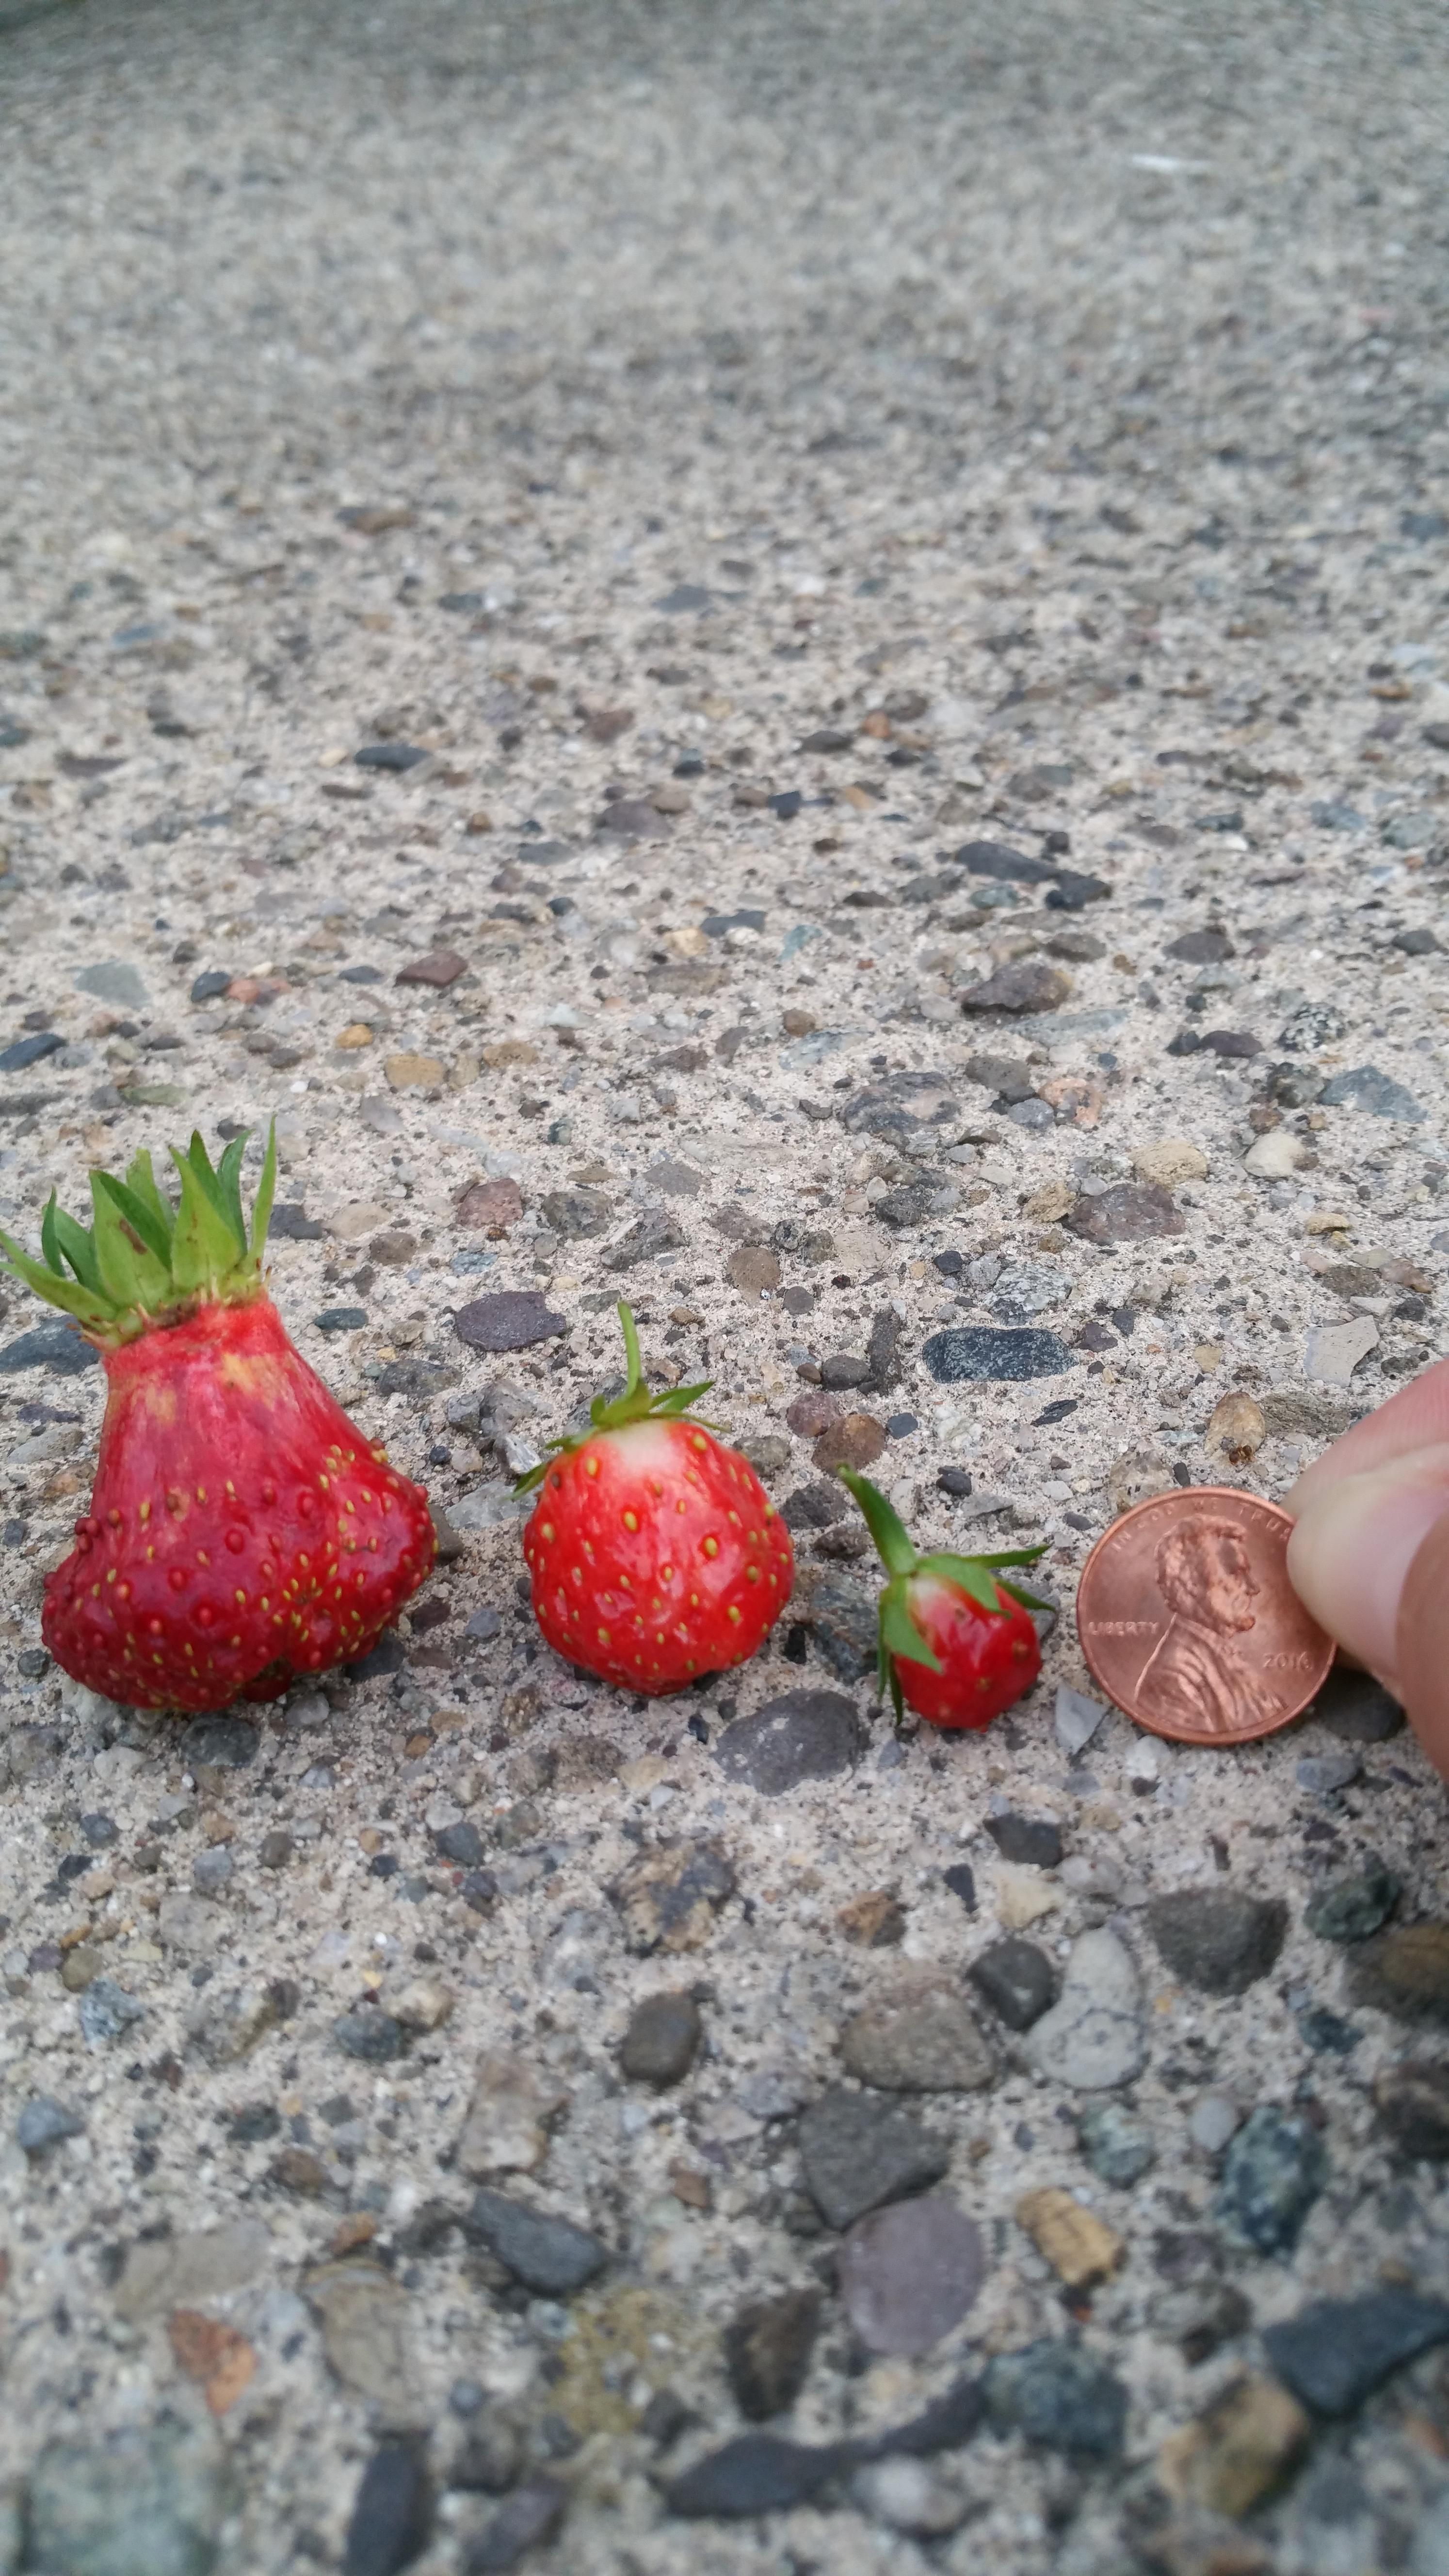 I see your bountiful carrot harvest and offer my bountiful strawberry harvest for dessert!